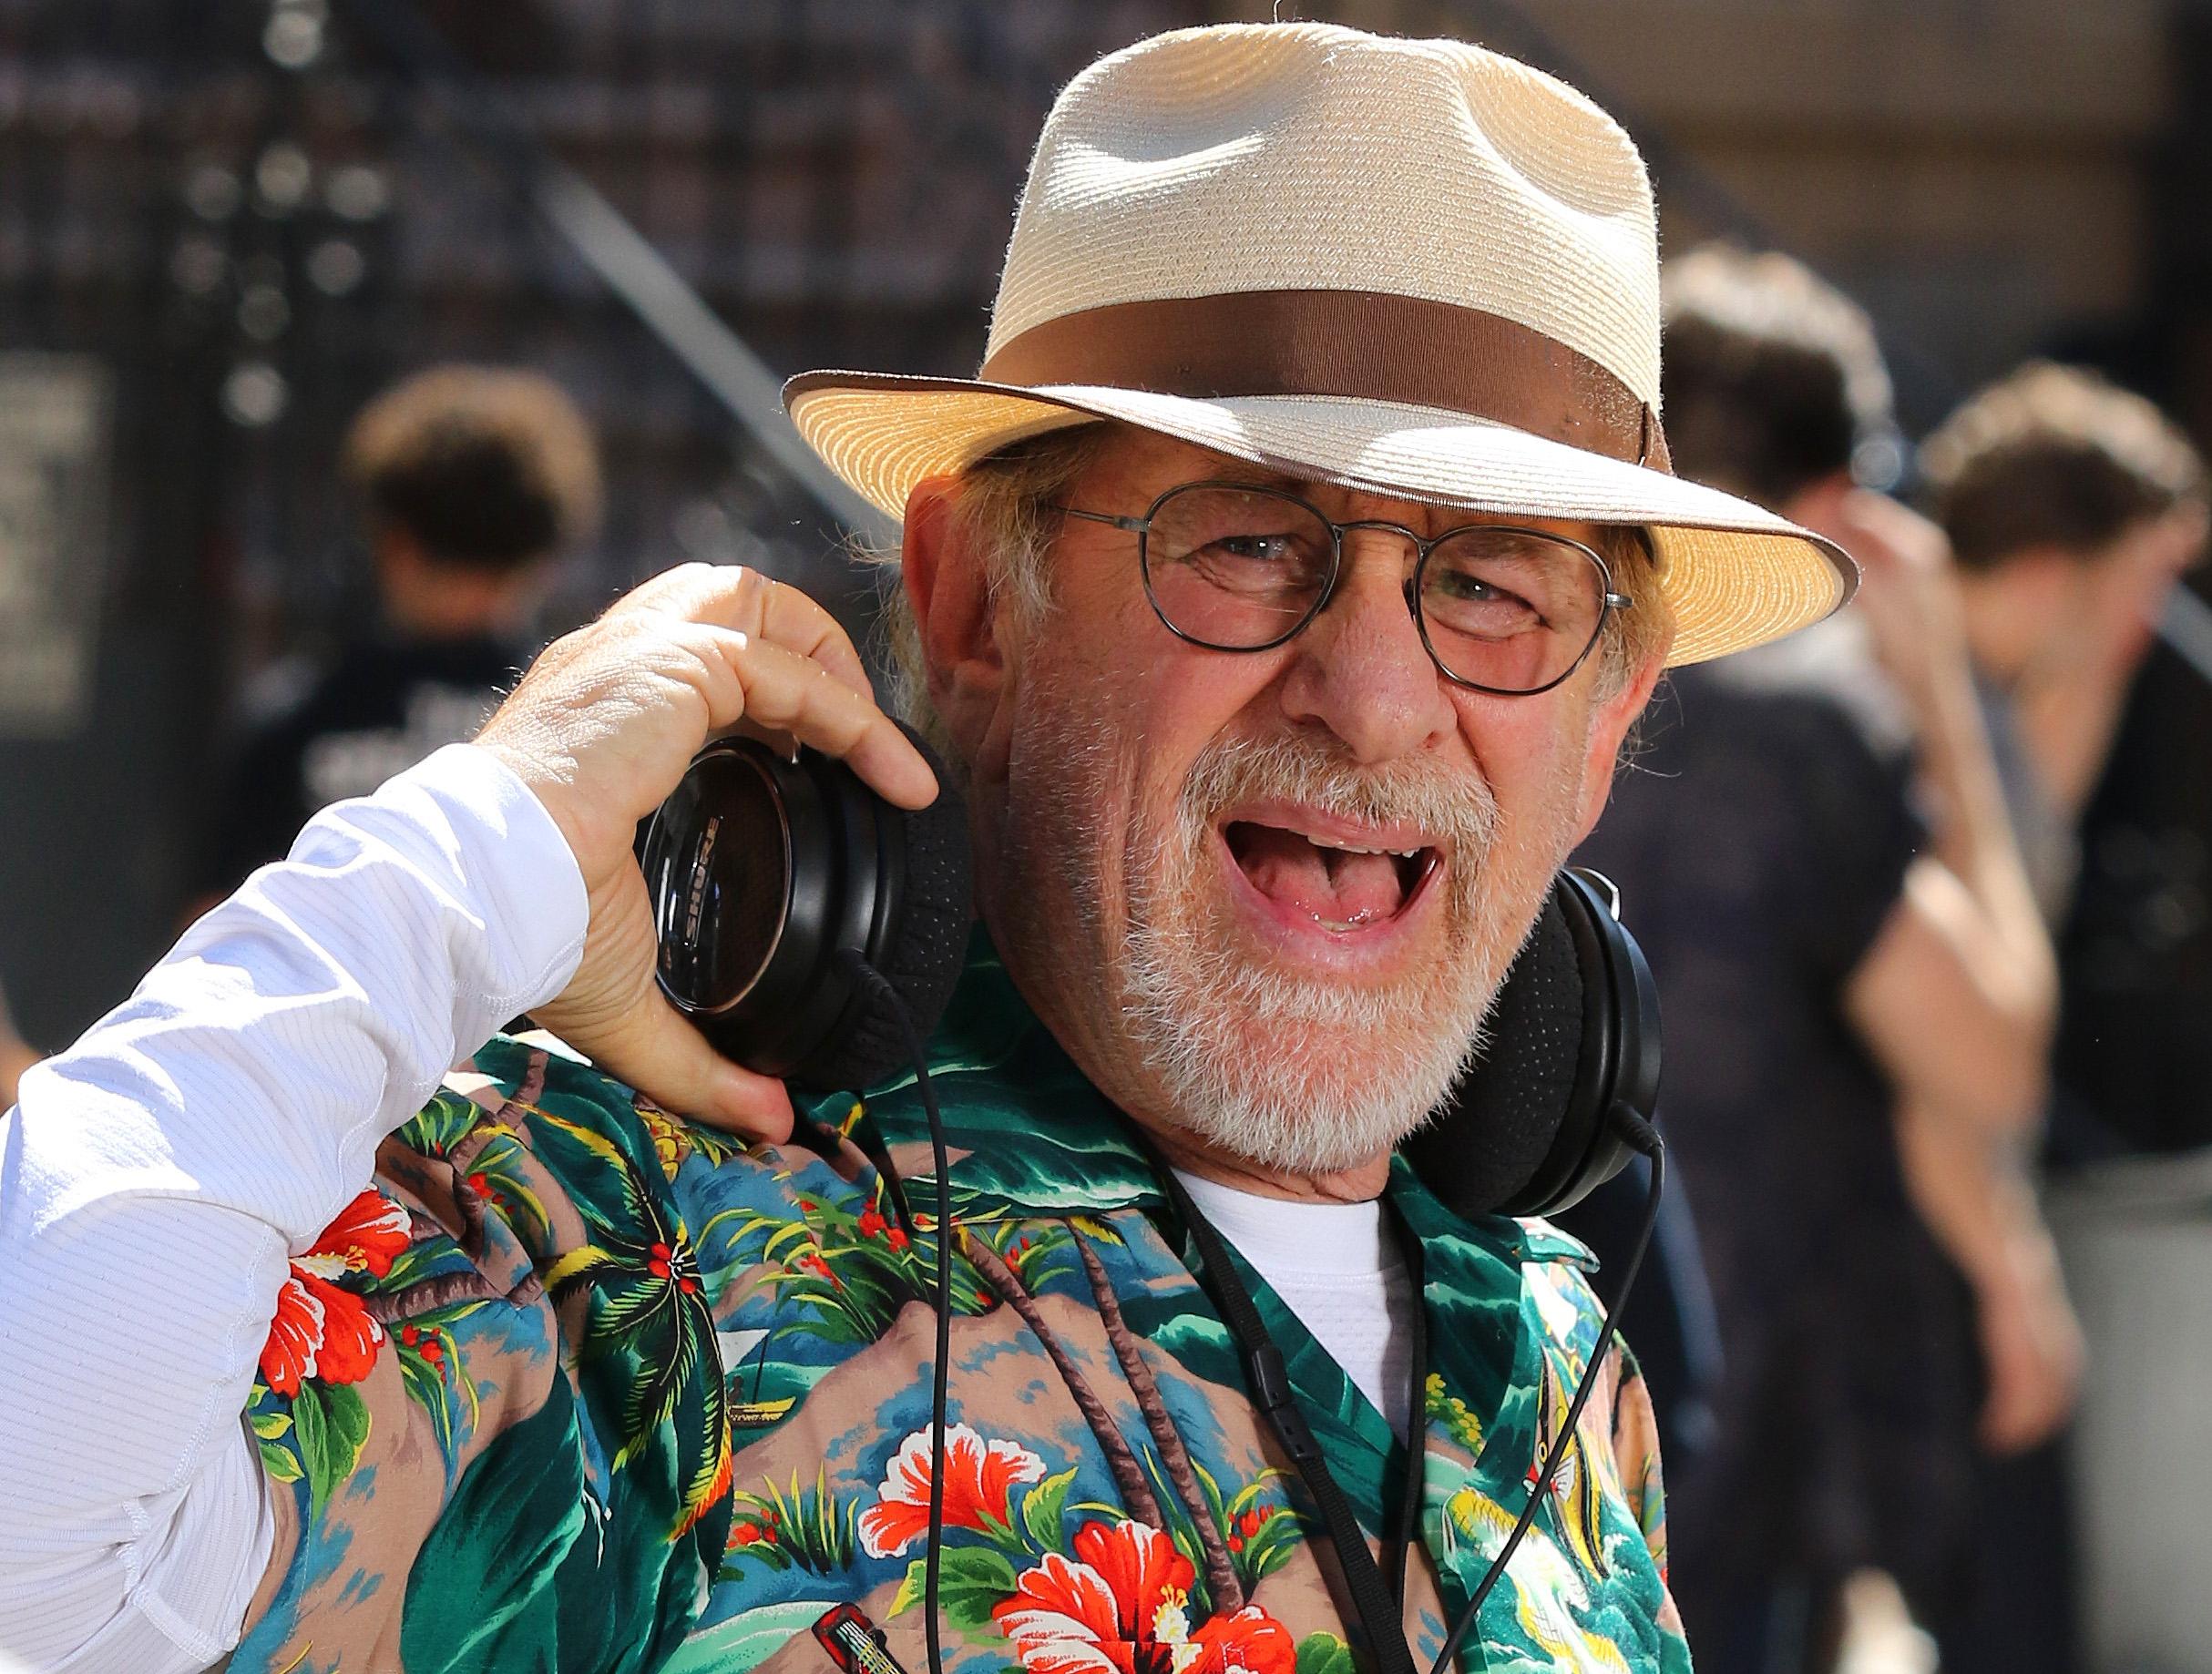 Steven Spielberg is hard at work directing apos The Jets apos on the movie remake of the classic musical quot West Side Story quot filming in NYC